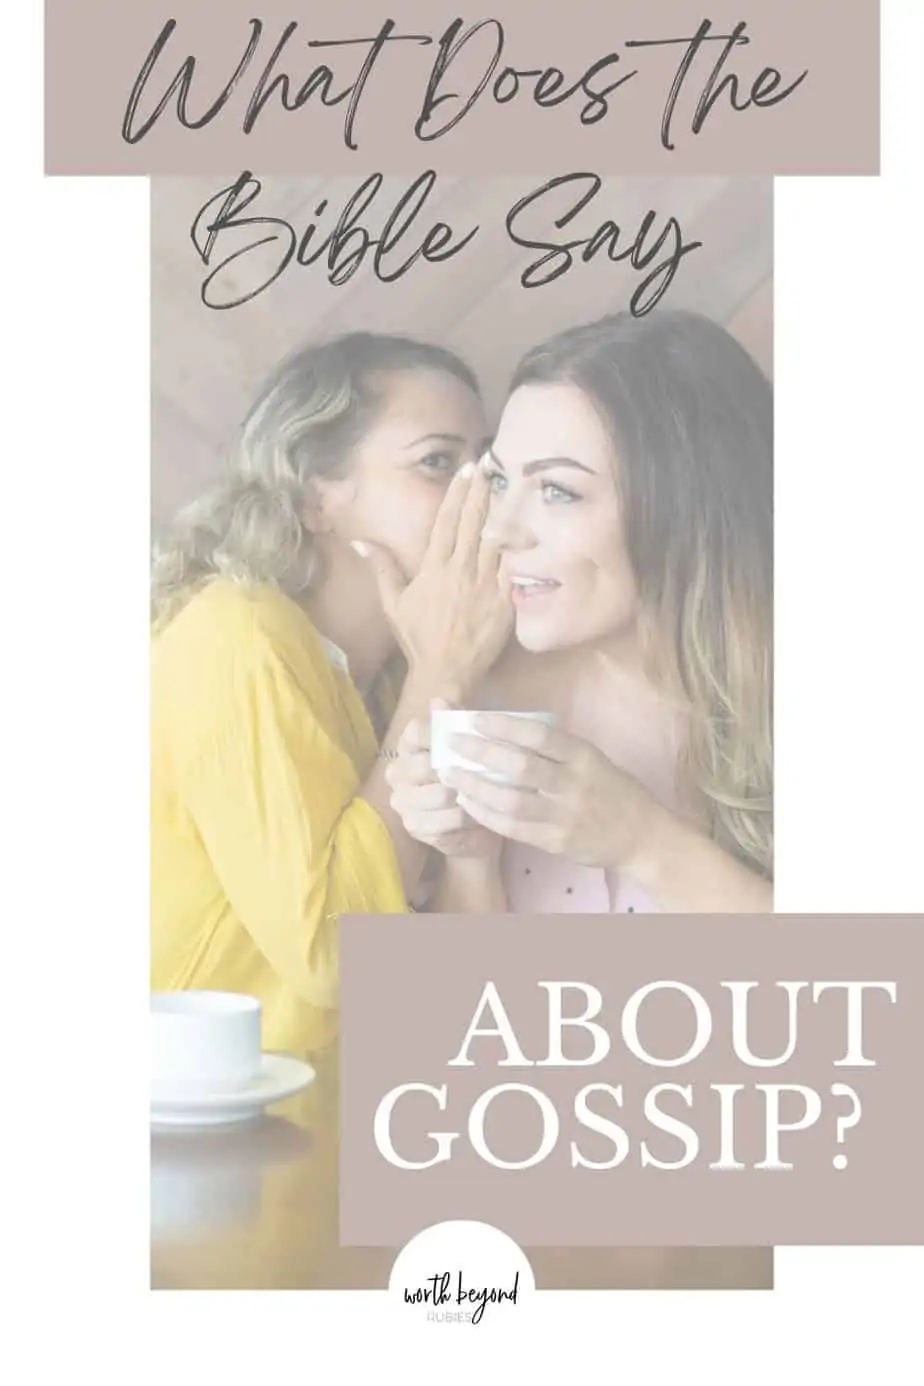 Two women gossiping and text that says